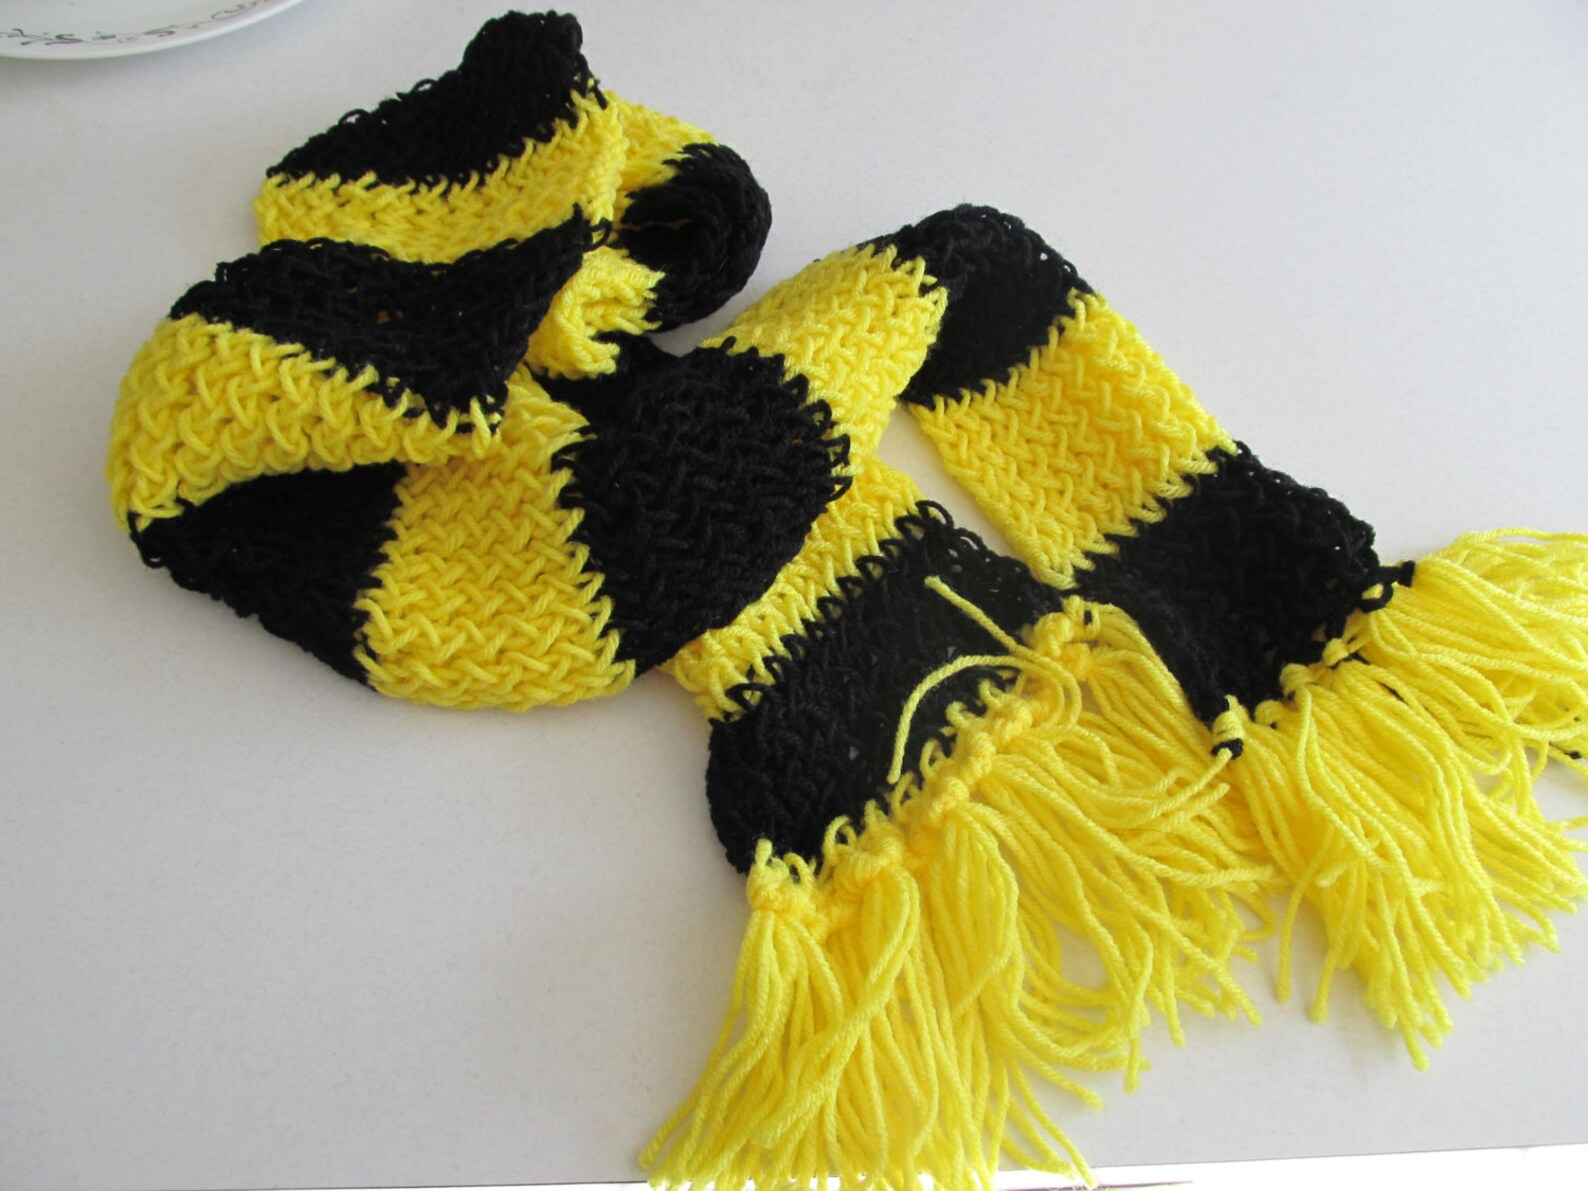 Soft Black & Yellow Scarf With Tassels Handmade Loom Knitted | Etsy